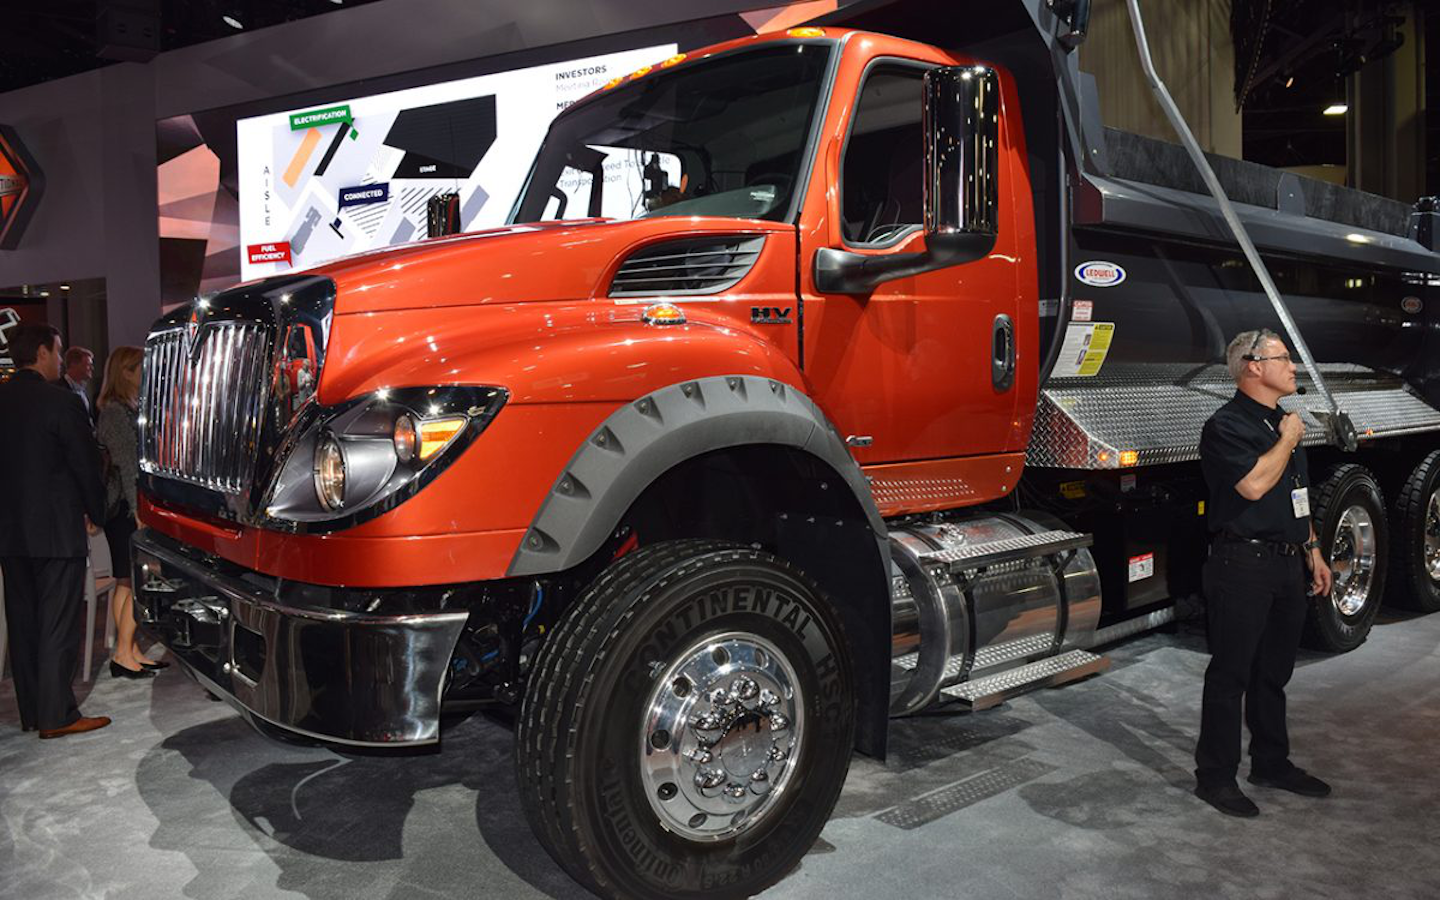 International unveils HV Series, a severe duty truck focused on driver